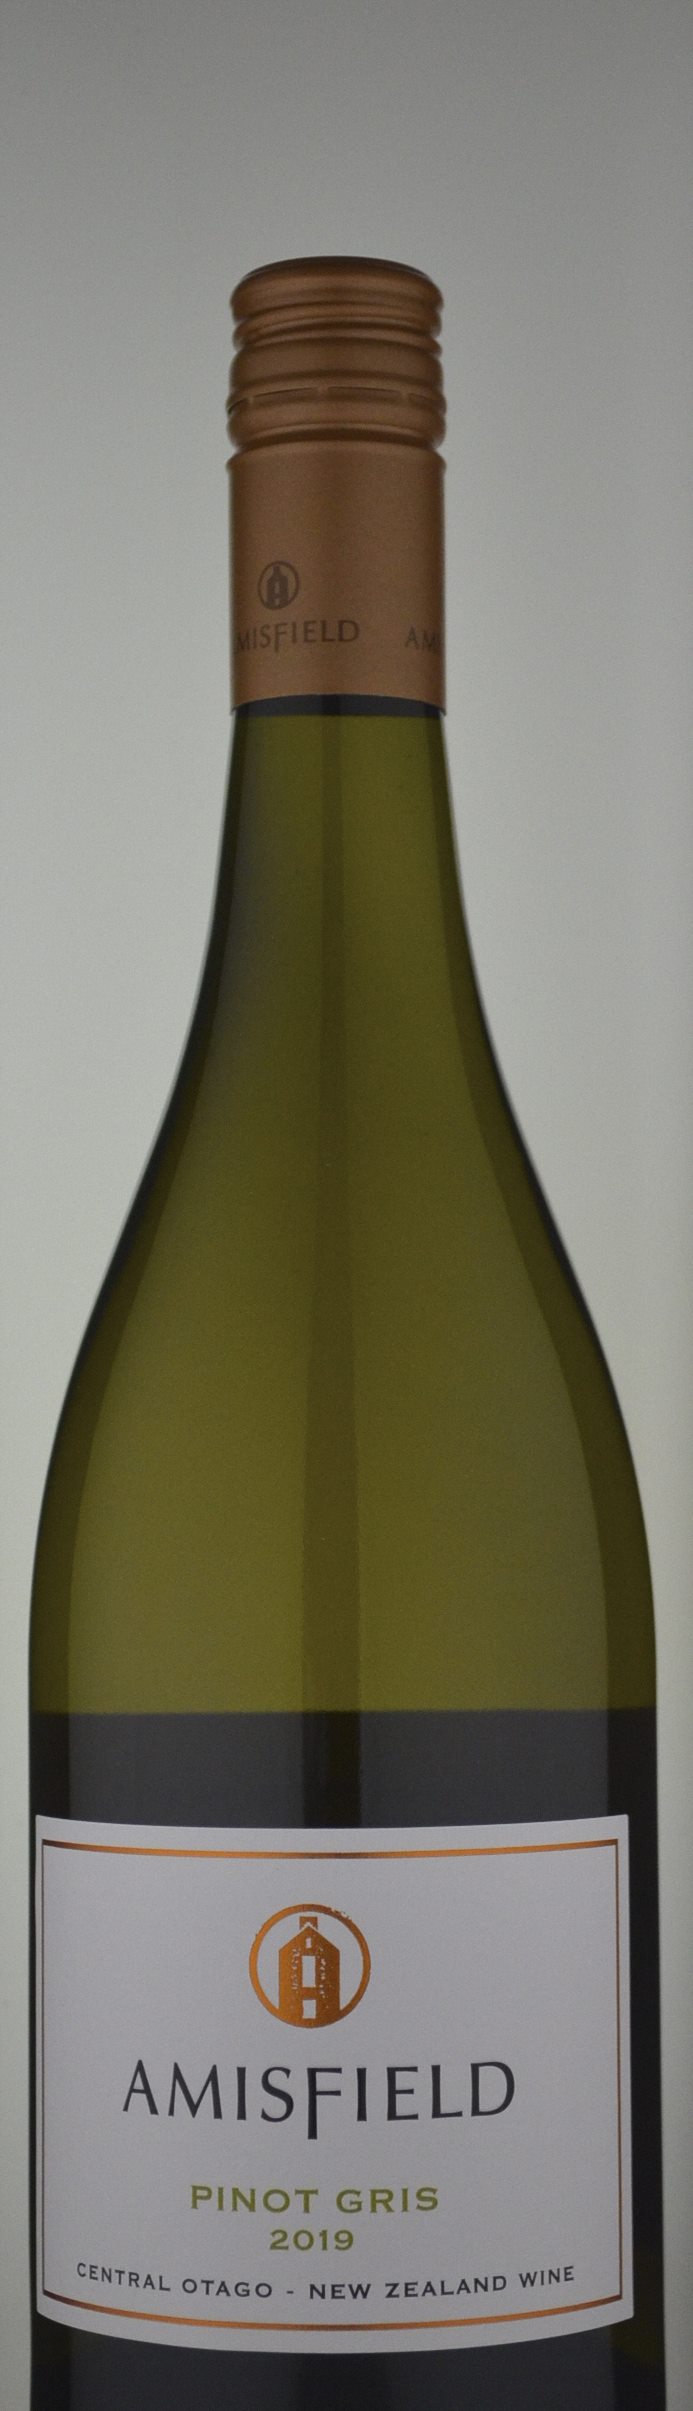 Amisfield Pinot Gris 2019